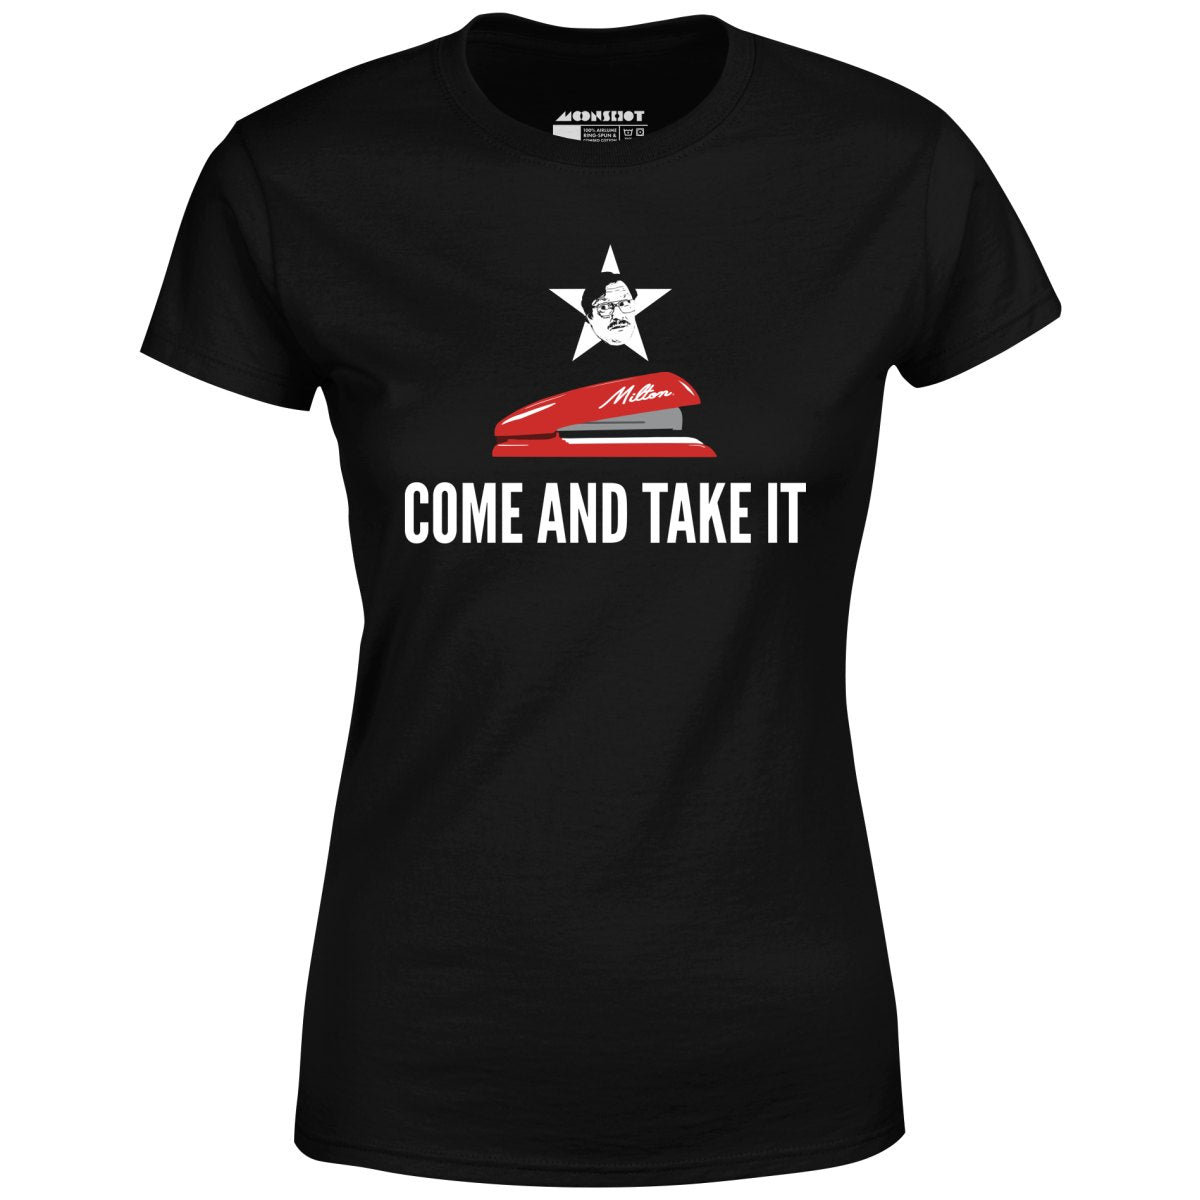 Milton's Red Stapler - Come and Take It - Women's T-Shirt